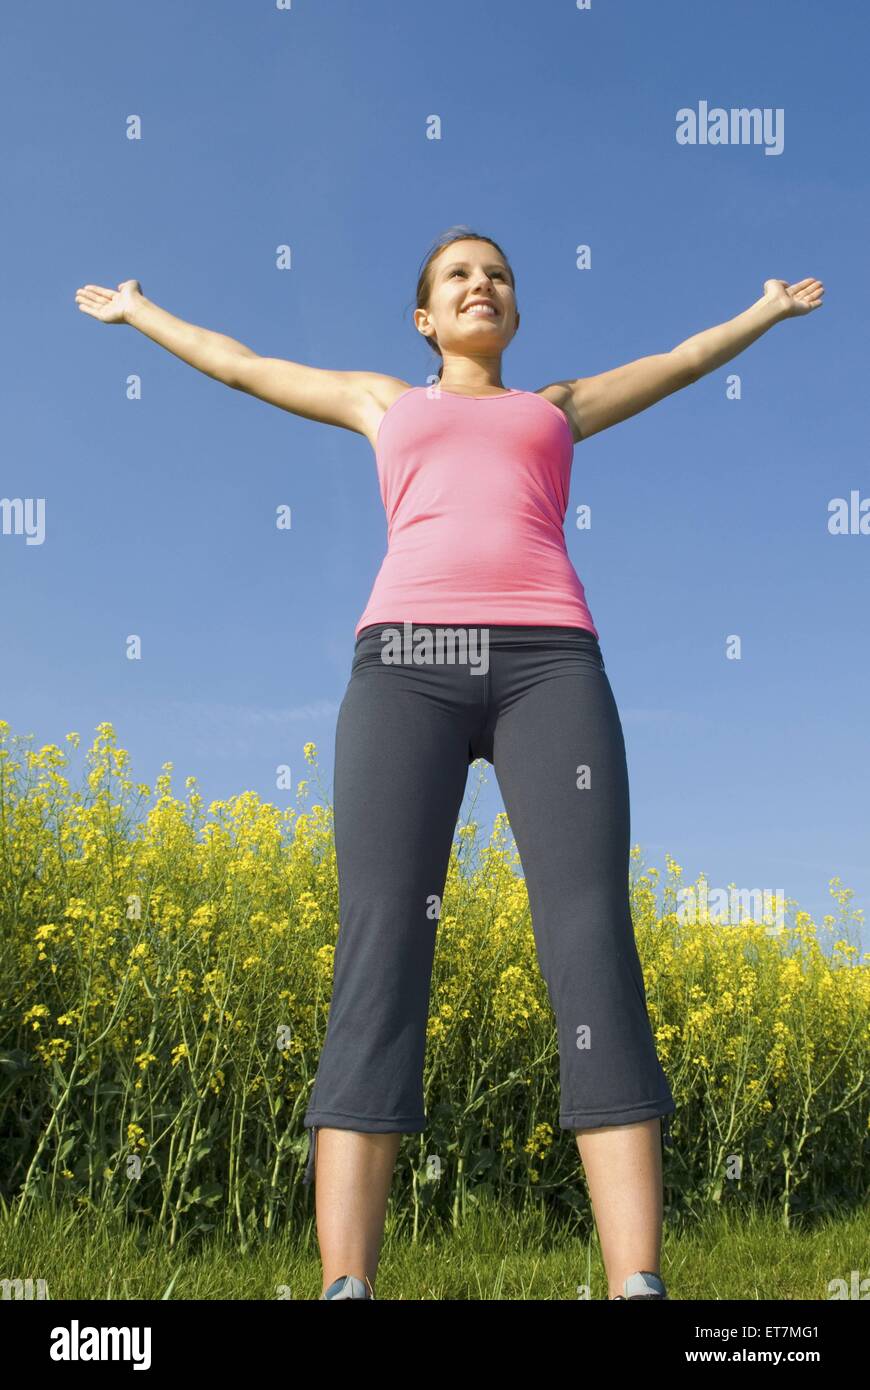 junge Frau macht Tai Chi in der Natur | young woman doing Tai Chi outdoor Stock Photo